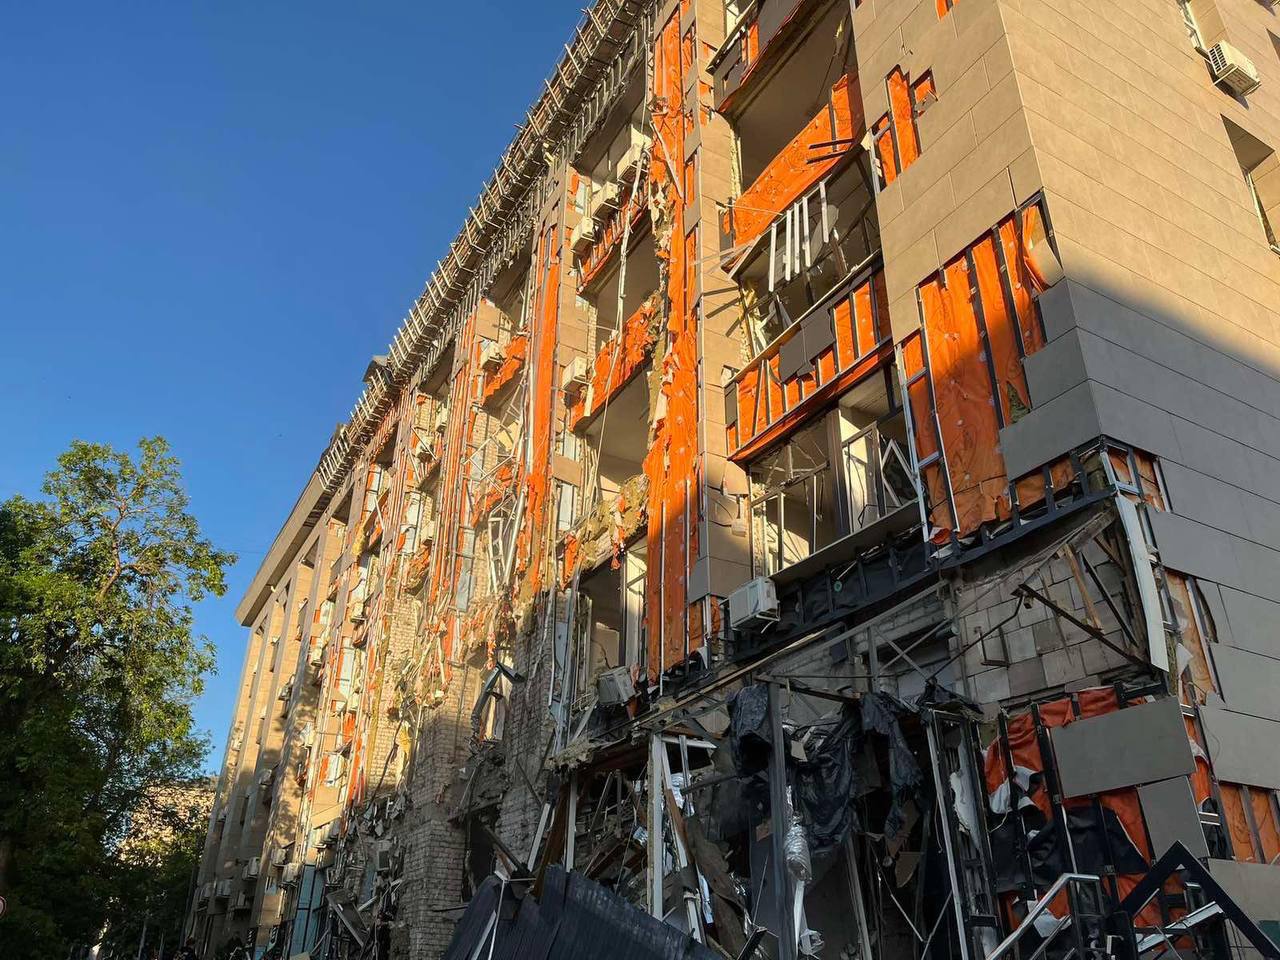 A residential apartment building damaged in Russian attack in the center of Kharkiv on May 25 / Source: Oleh Syniehubov's Telegram